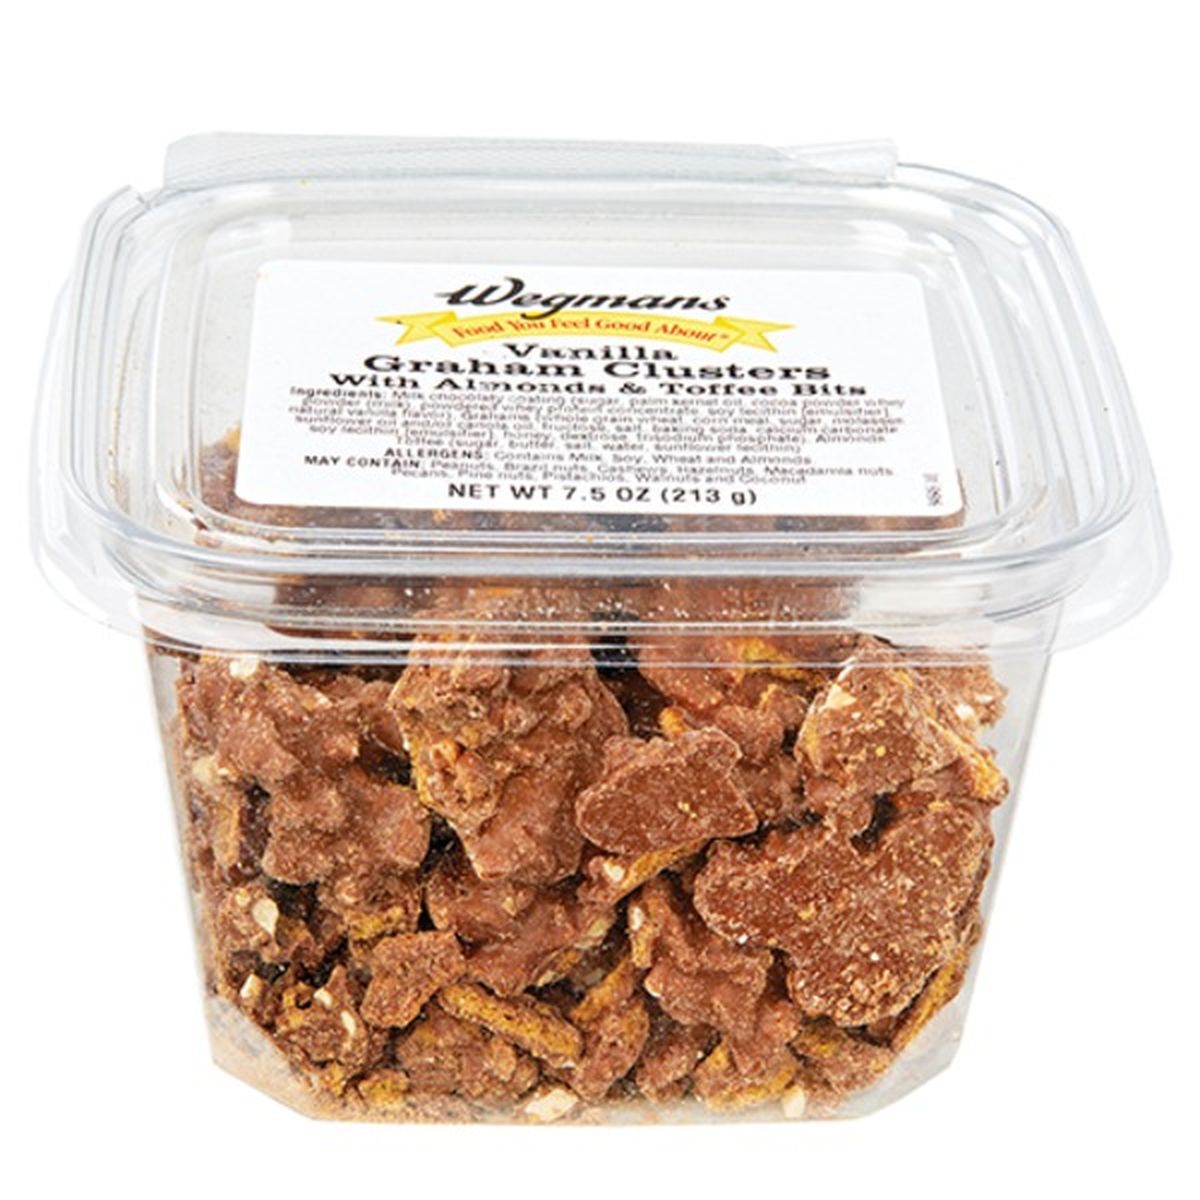 Calories in Wegmans Graham Clusters with Almonds & Toffee Bits